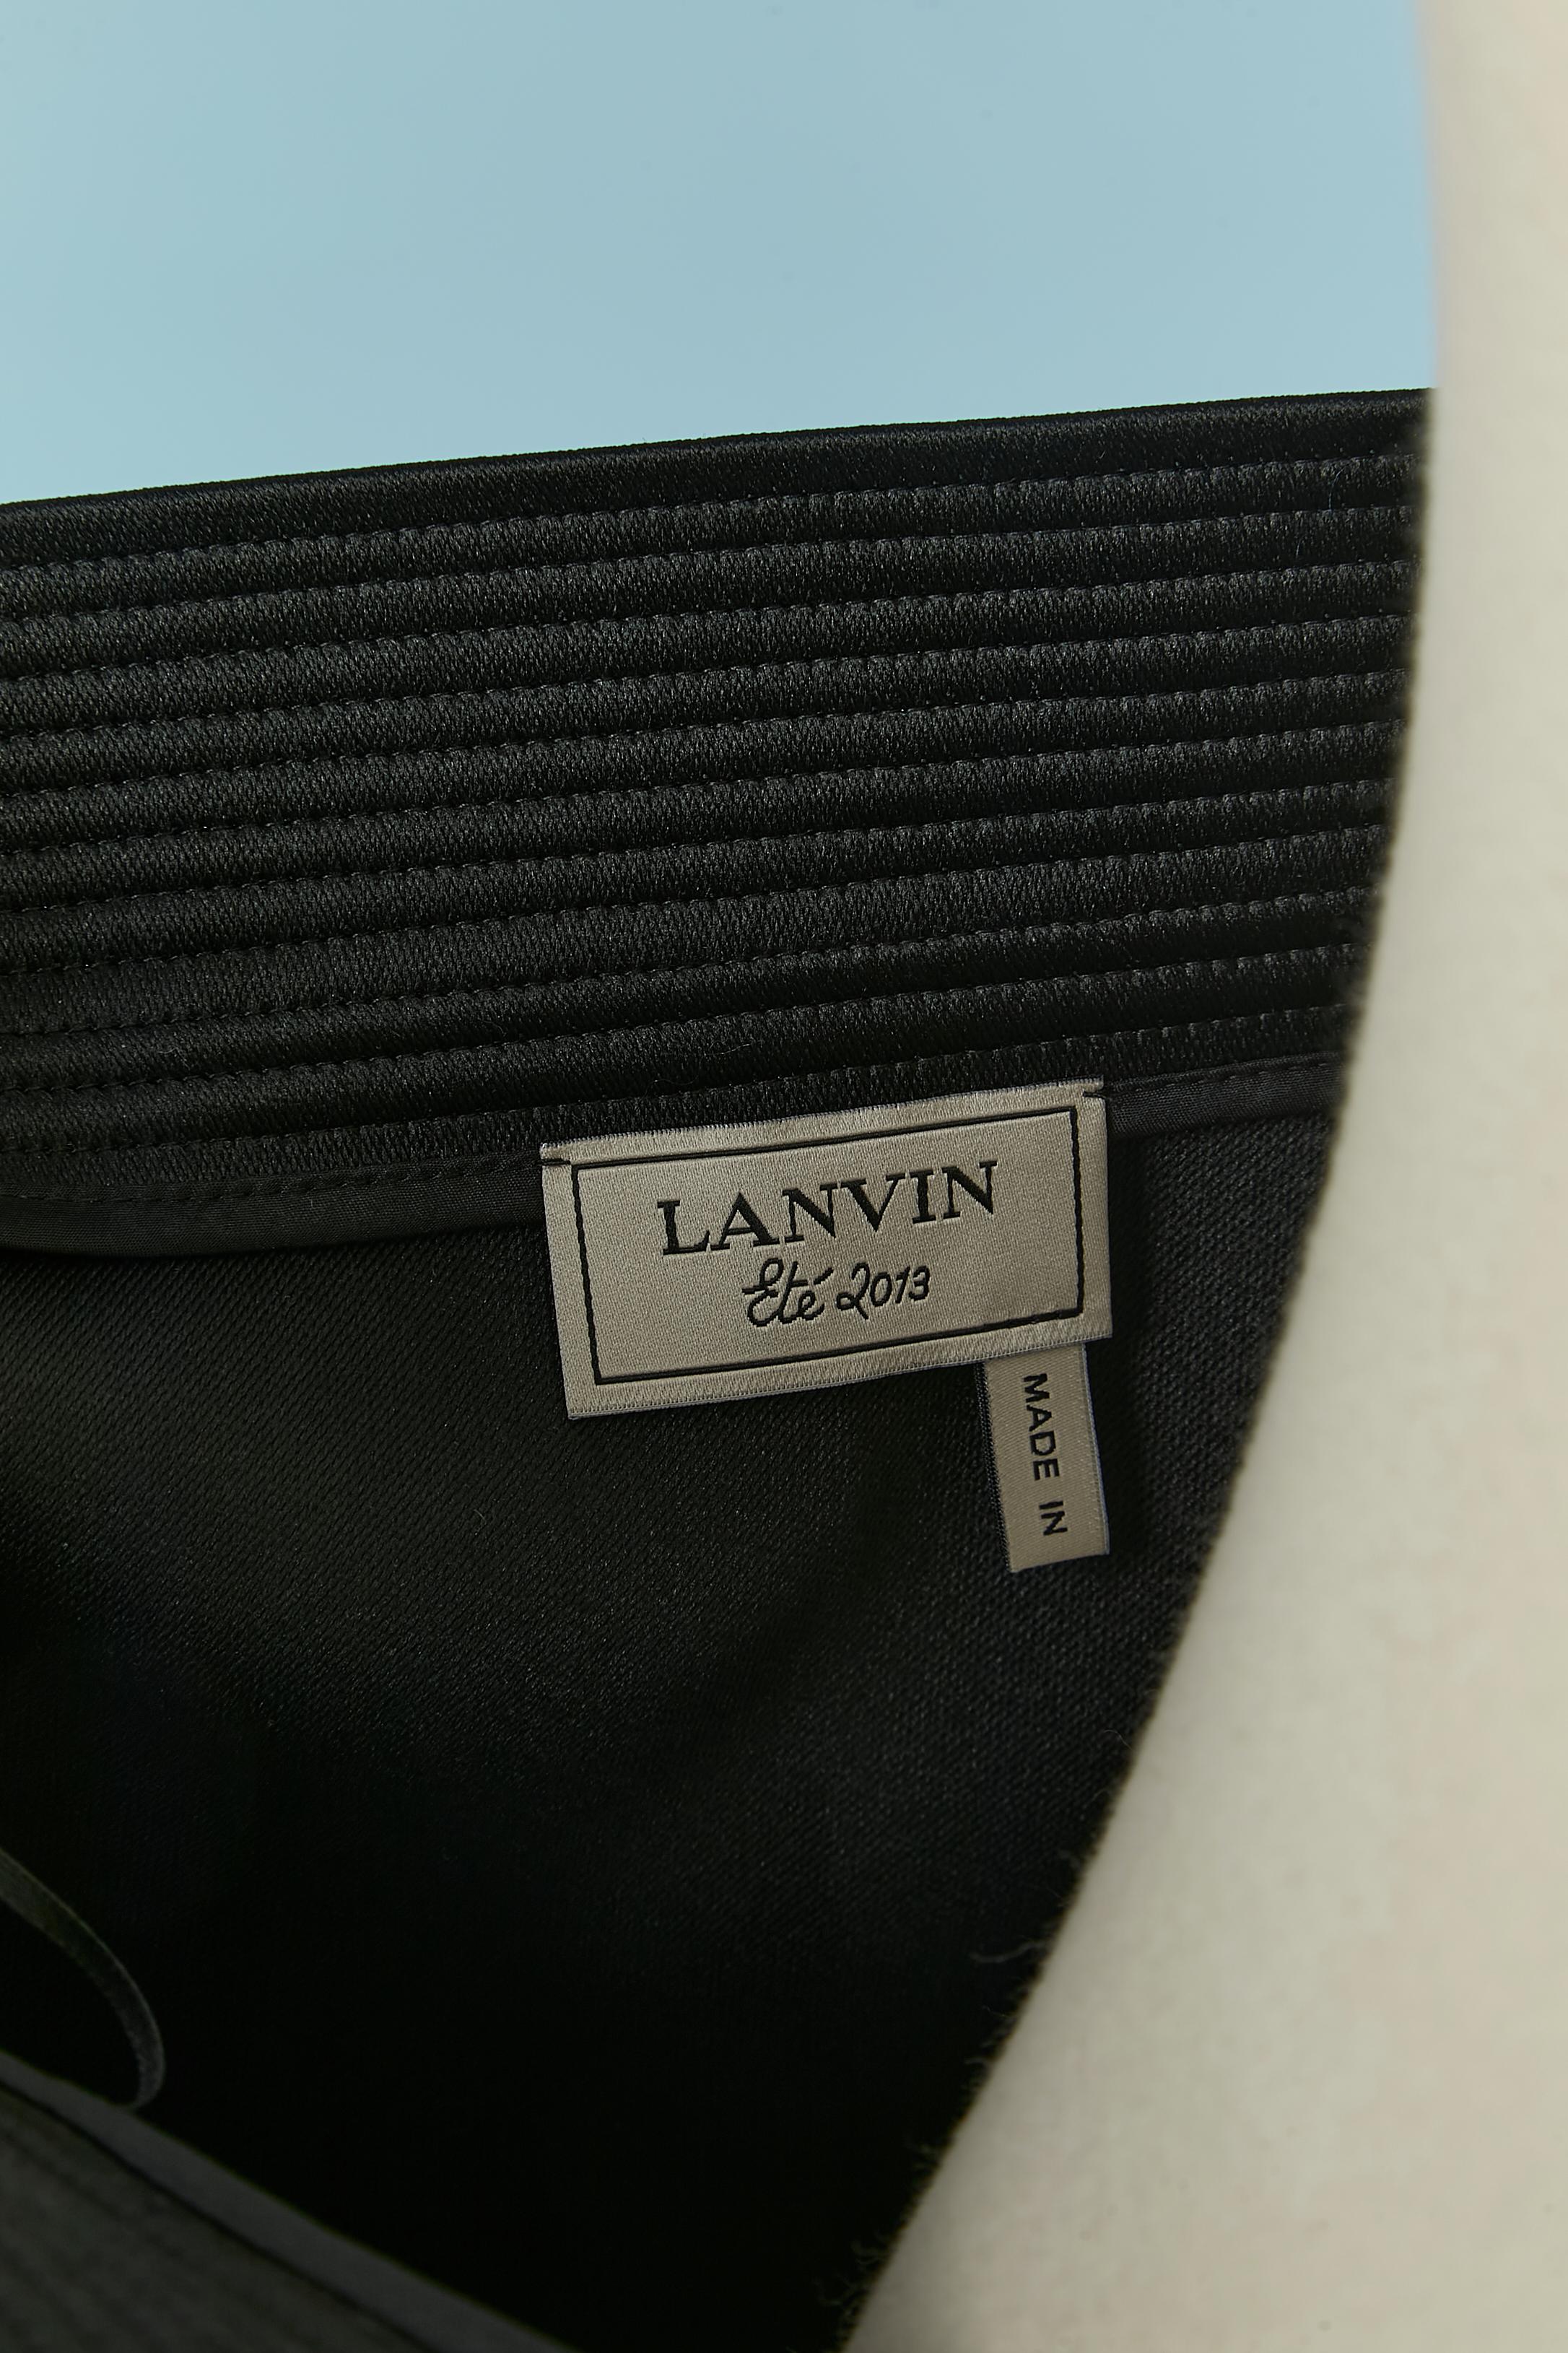 Black asymmetrical wrap skirt with bow Lanvin by Alber Elbaz SS 2013 For Sale 1